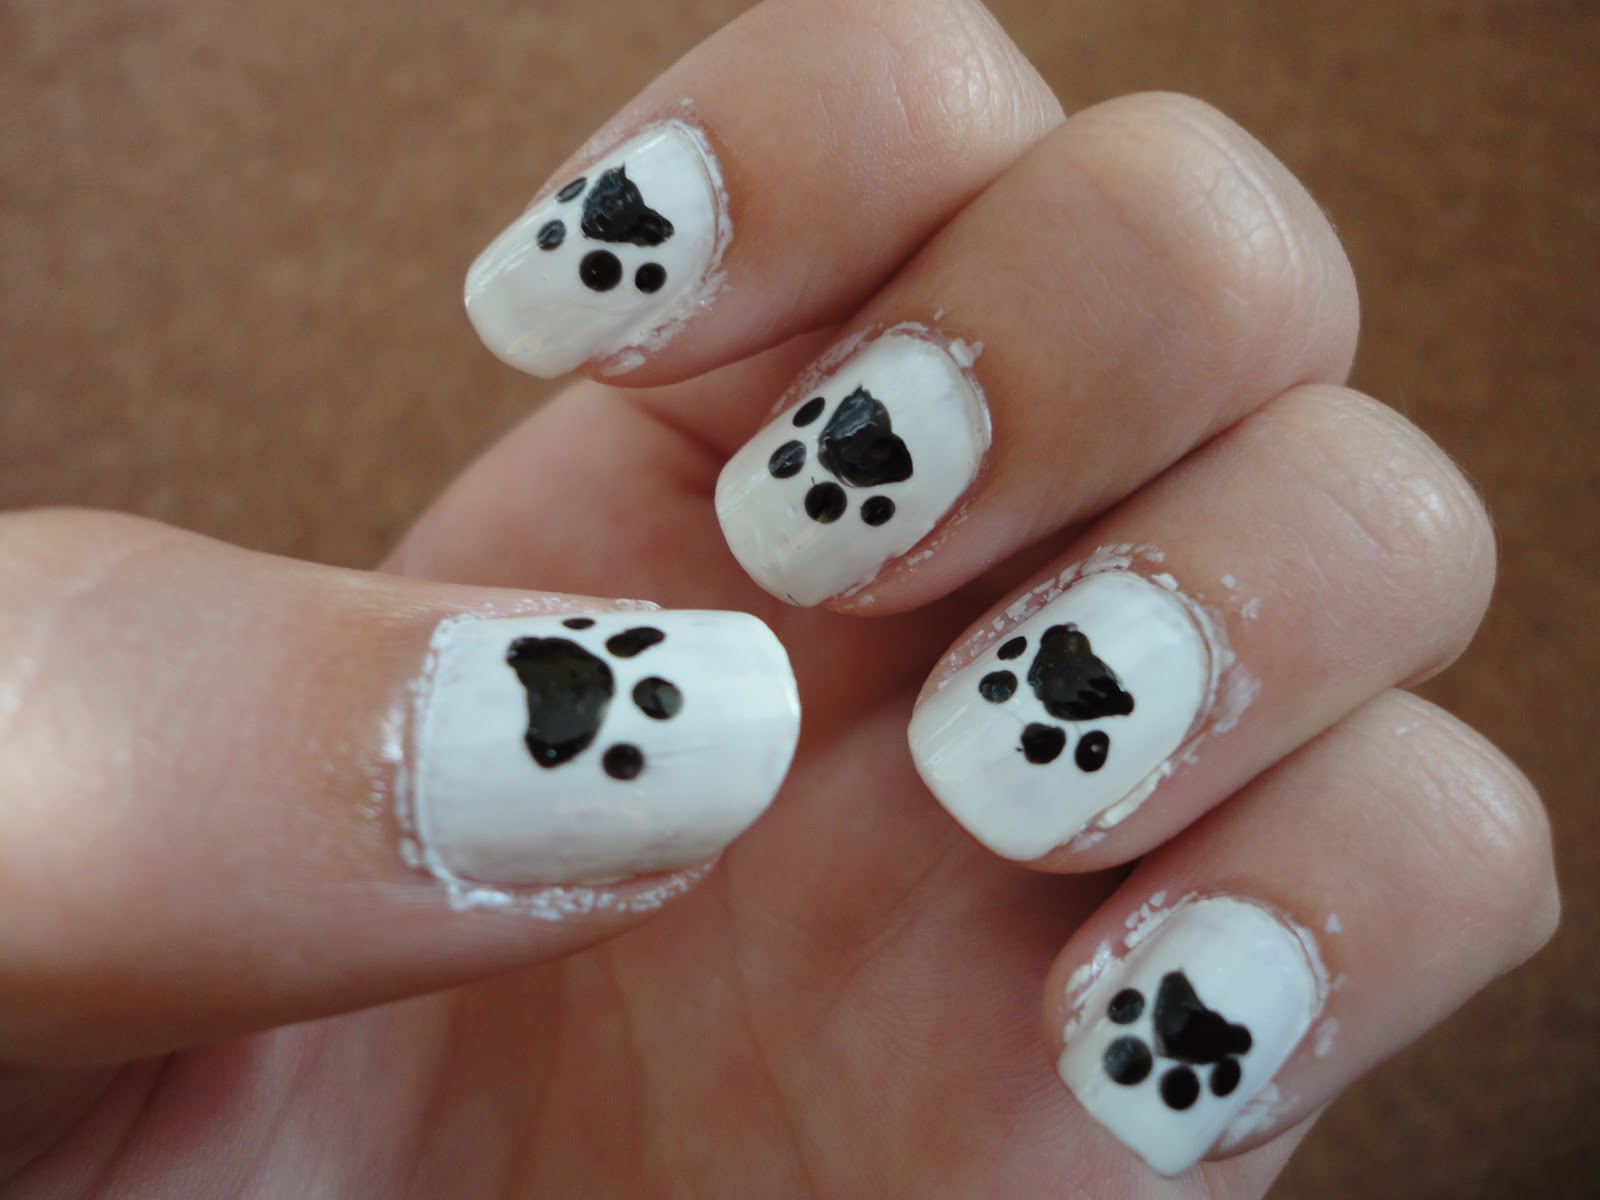 10. Paw Print Toe Nail Design for Short Nails - wide 3